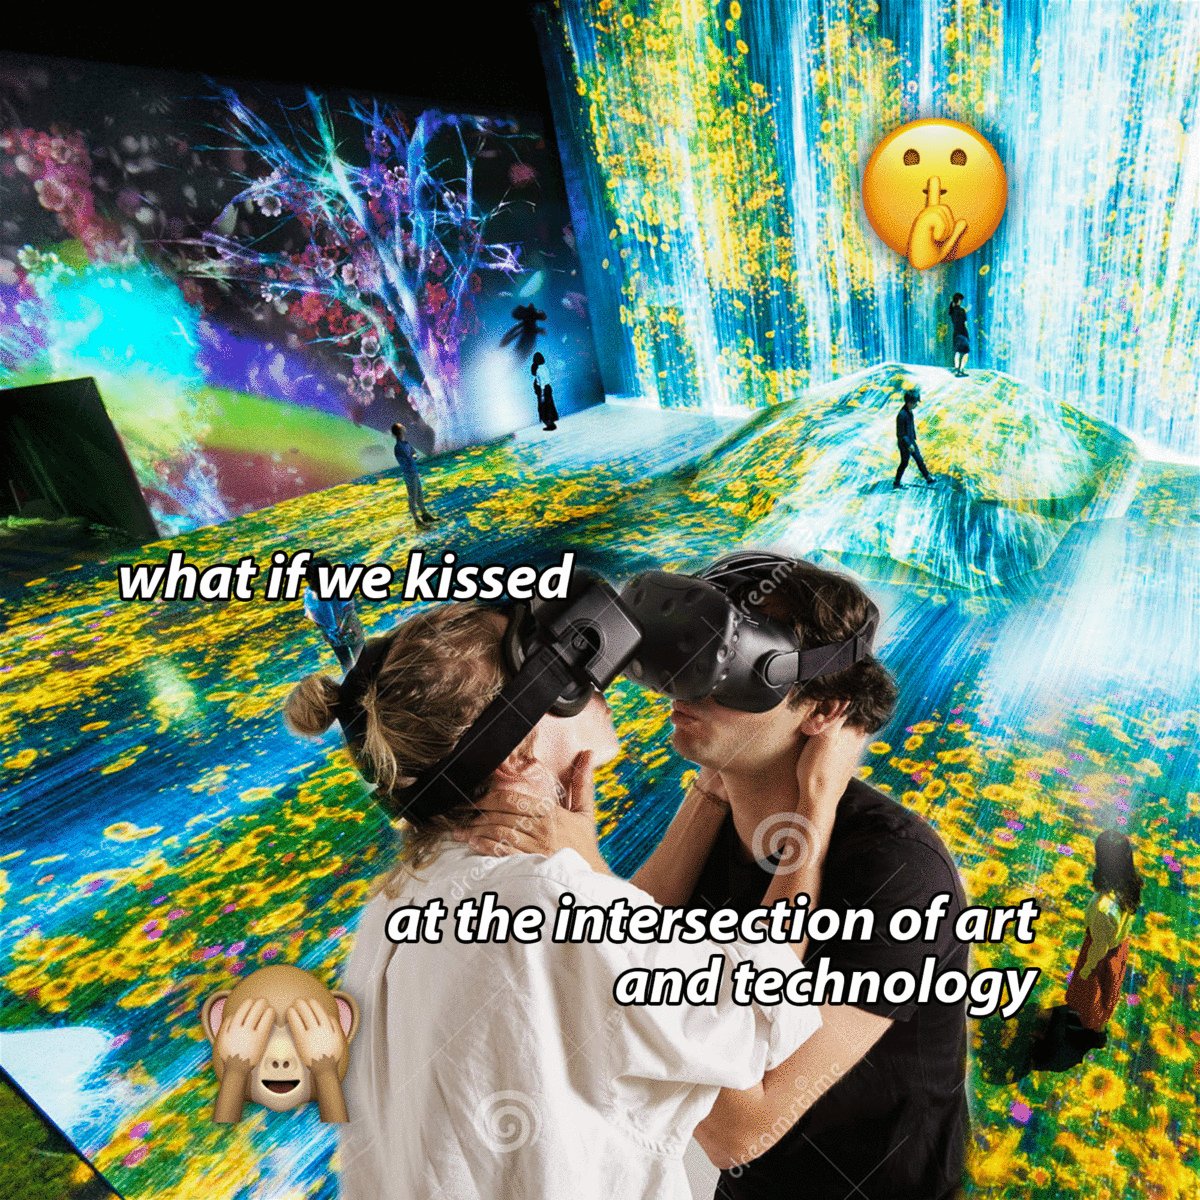 Meme of two people in VR headsets kissing with text 'what if we kissed at the intersection of art and technology?'